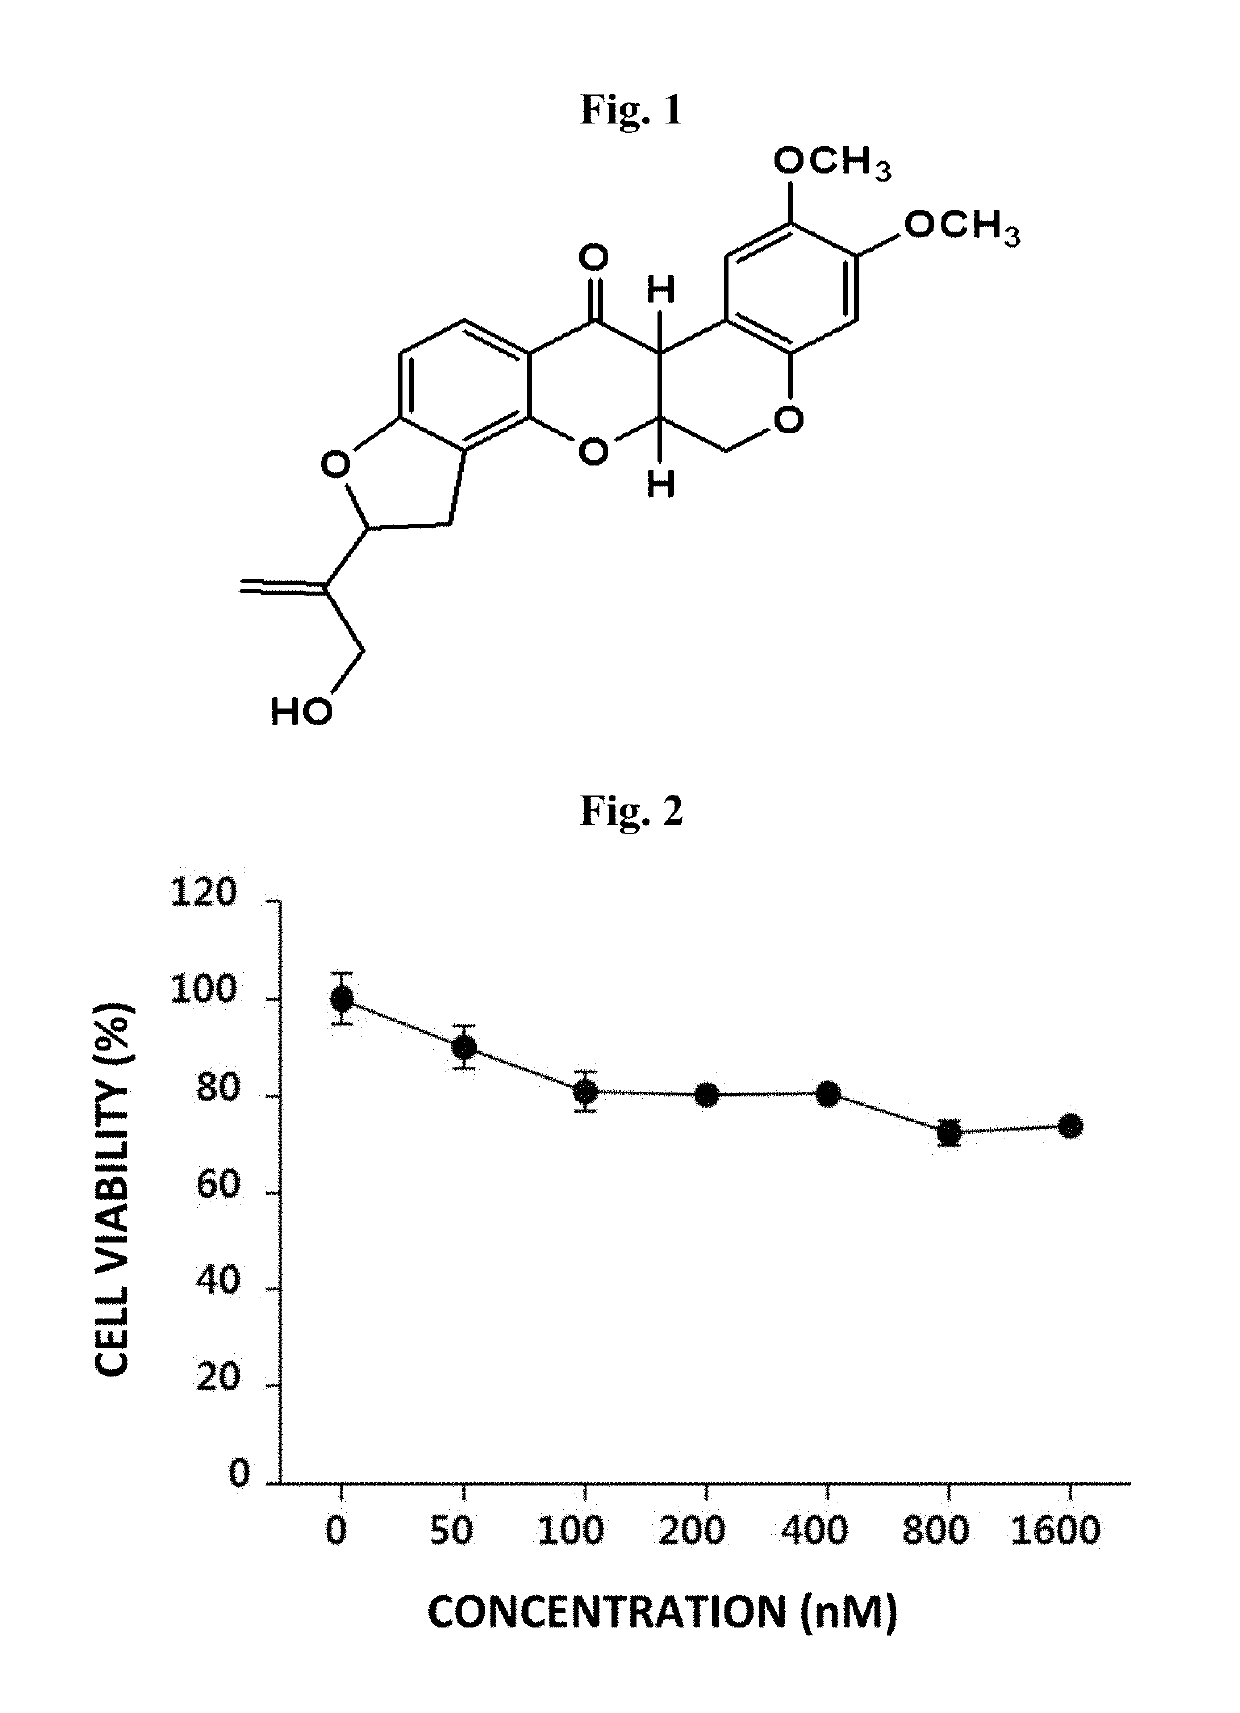 Composition for skin whitening comprising amorphigeni as effective ingredient